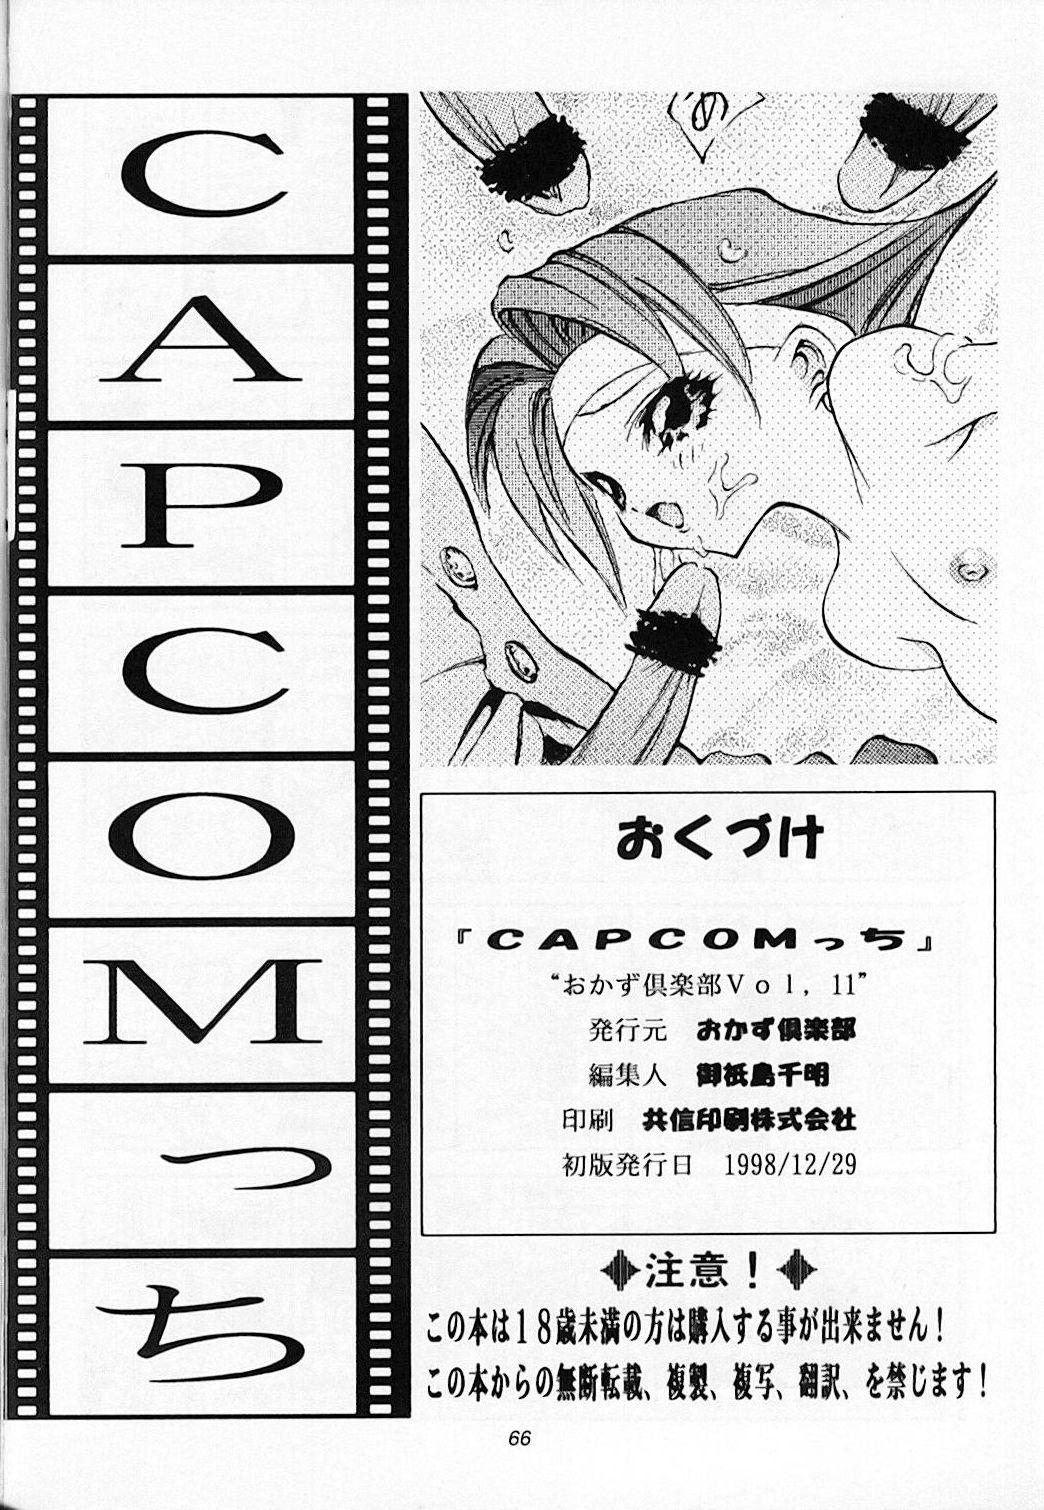 Eating Pussy CAPCOMcchi - Street fighter Darkstalkers Rival schools Mega man legends Peeing - Page 67